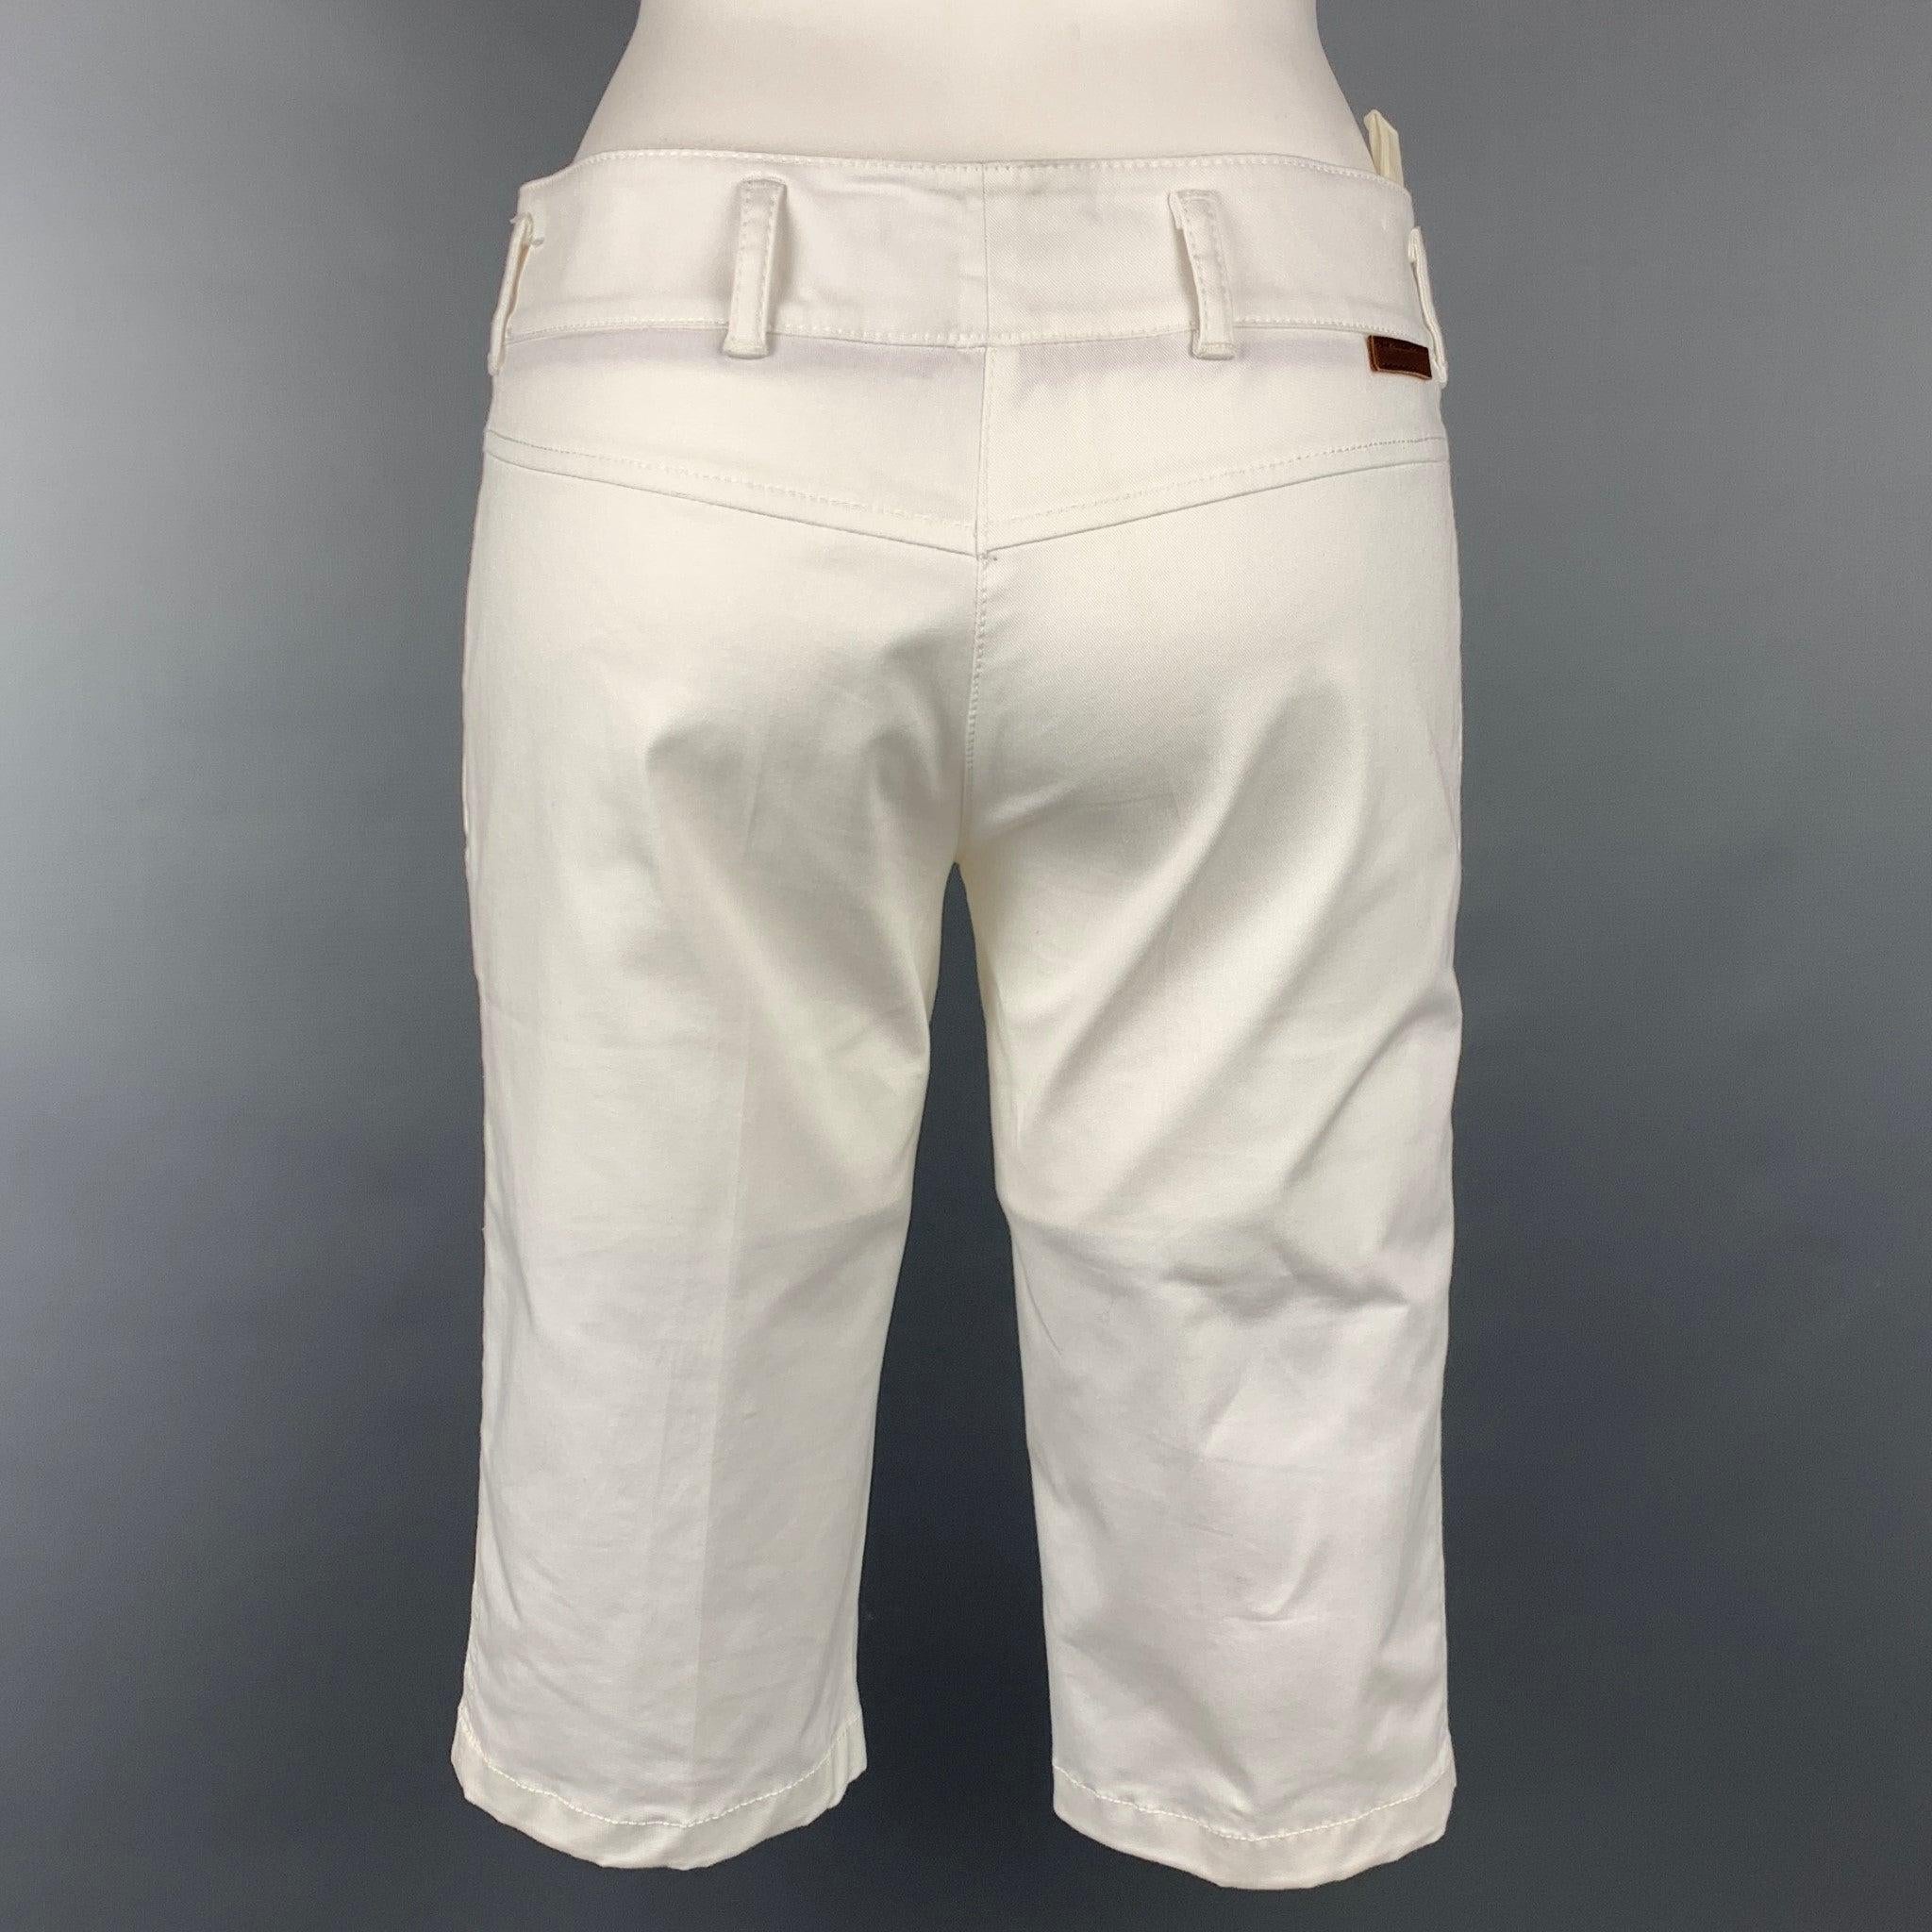 PRADA shorts comes in a white cotton blend featuring a bermuda style, zip fly, and a front tab closure.
Very Good
Pre-Owned Condition. 

Marked:   38 

Measurements: 
  Waist: 30 inches  Rise: 8 inches  Inseam: 14 inches 
  
  
 
Reference: